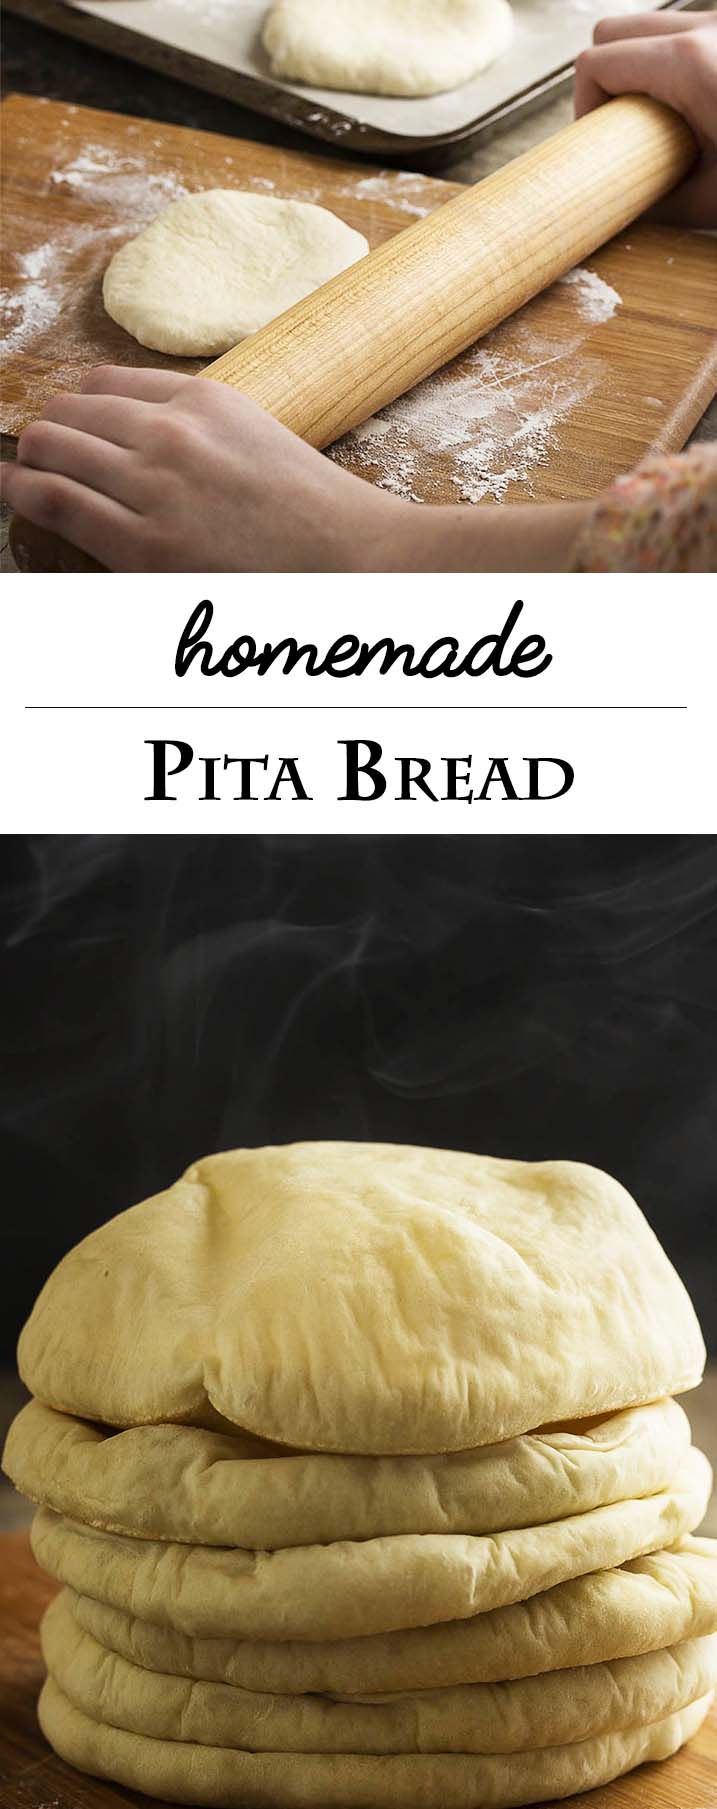 Homemade Greek Pita Bread isn't hard to make! You simply need a hot oven, fresh yeast, and a few tricks to make yummy pocket bread. | justalittlebitofbacon.com